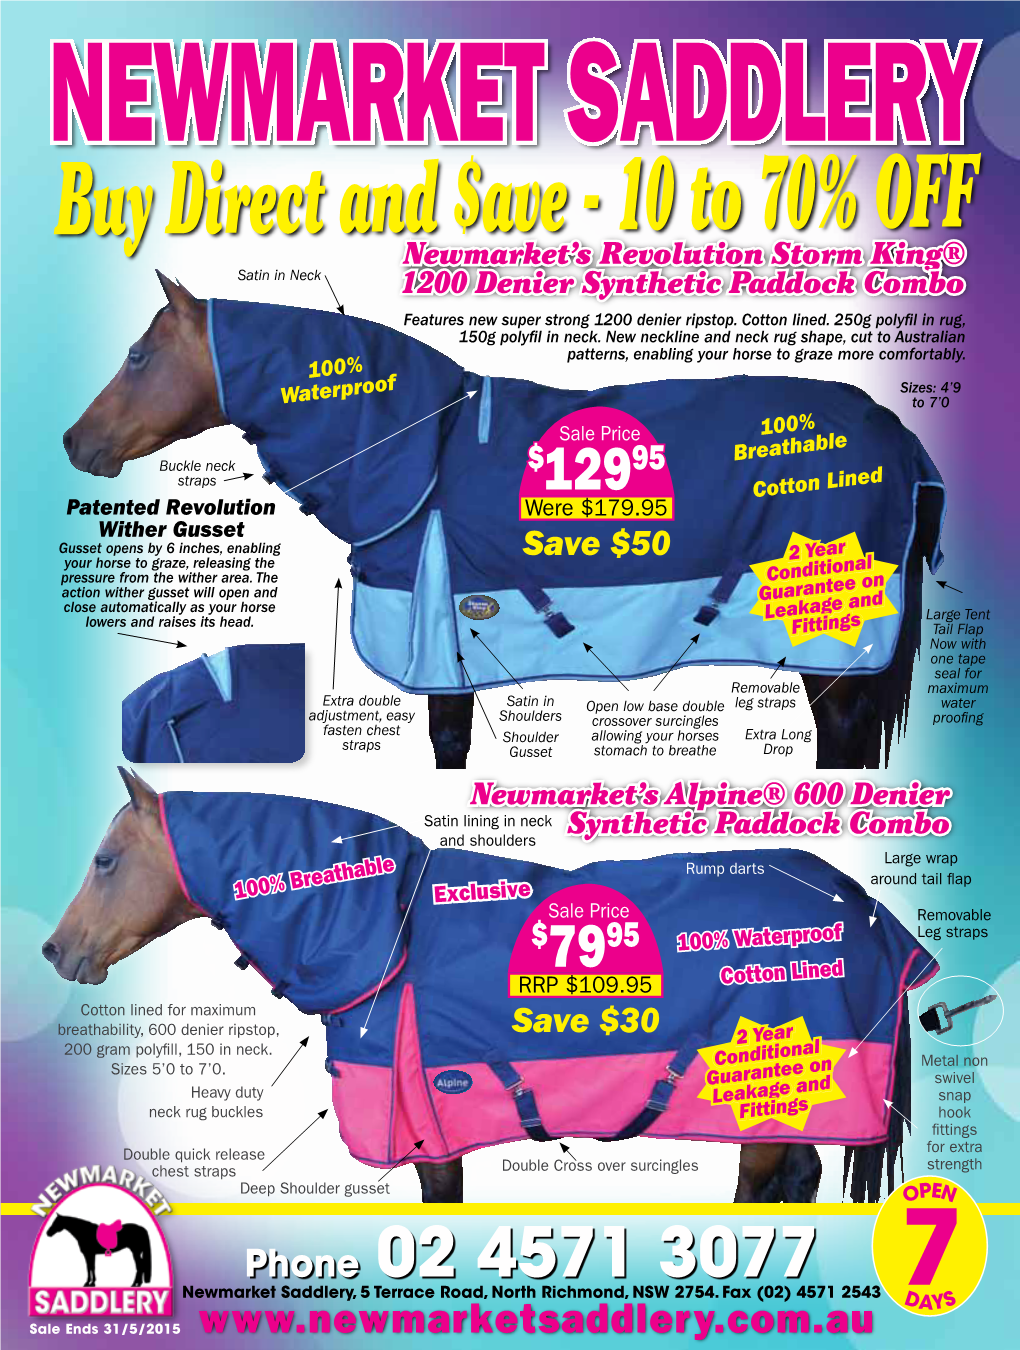 Buy Direct and $Ave - 10 to 70% OFF Breathability, 600 Denierripstop, Gusset Opensby 6Inches, Enabling Pressure Fromthewitherarea